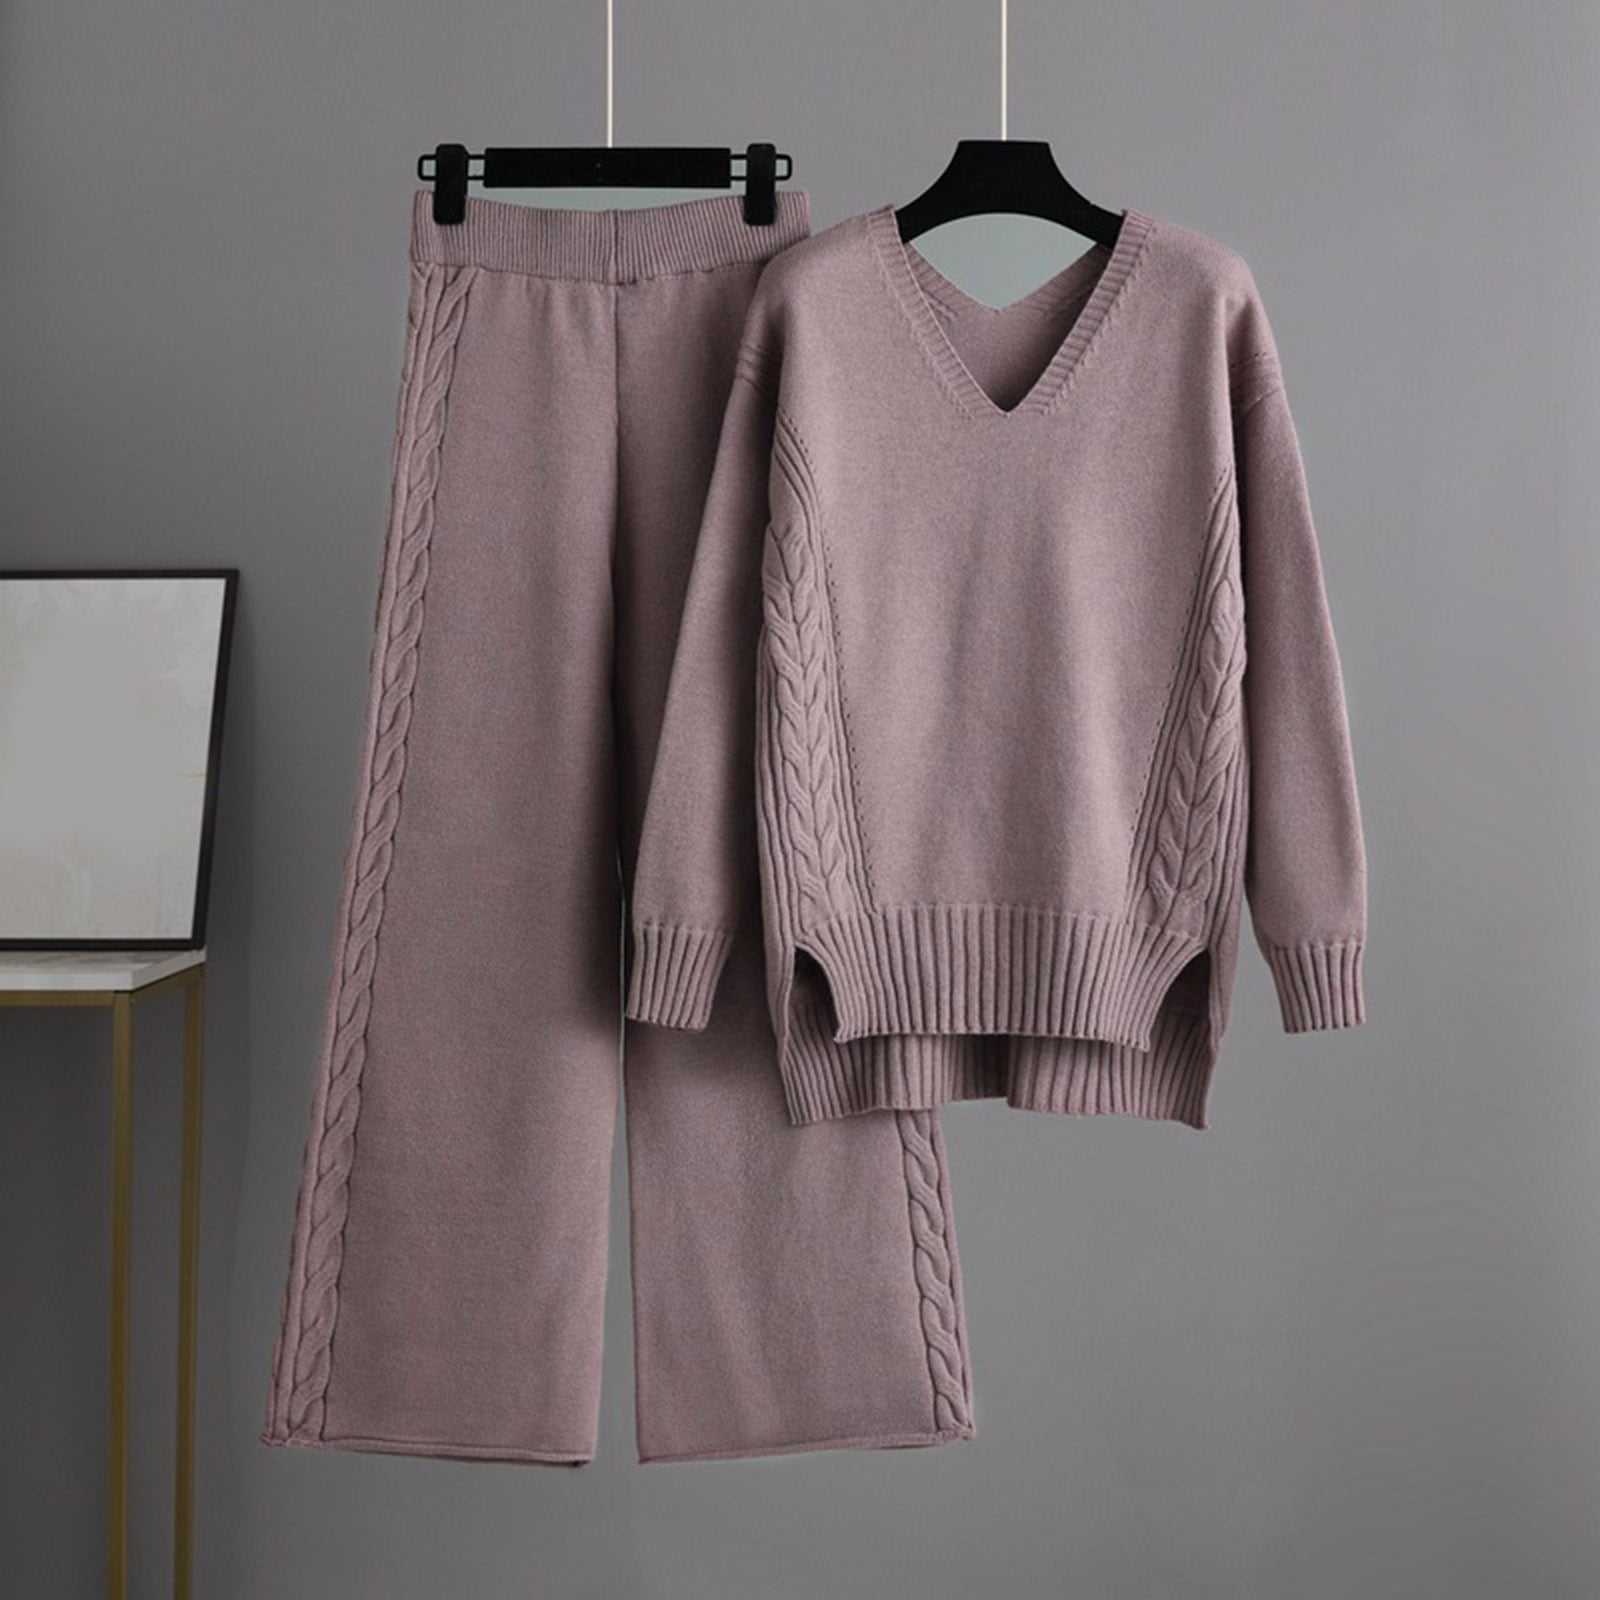 Women Autumn Winter Two Piece Set Knit Outfit Sweater Jumper Pants Trousers